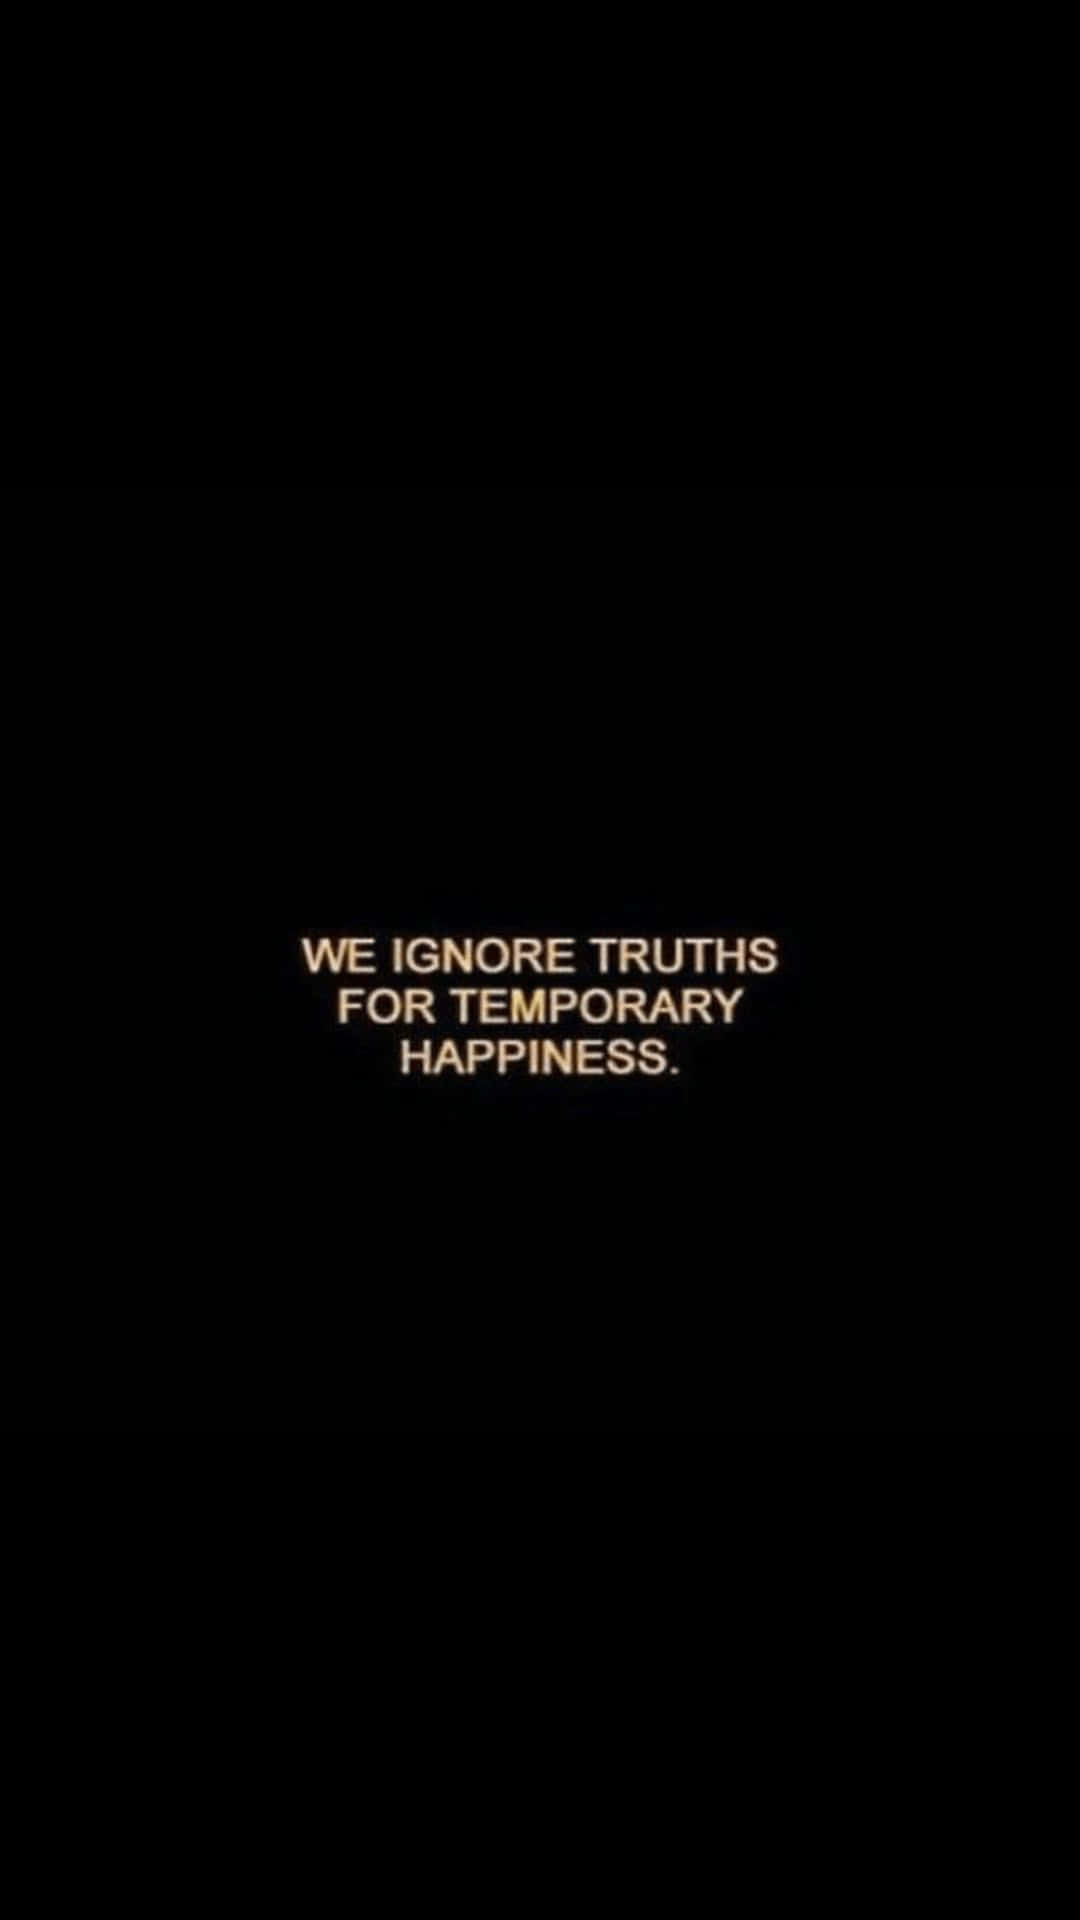 We Don't Like Truths For Temporary Happiness Wallpaper